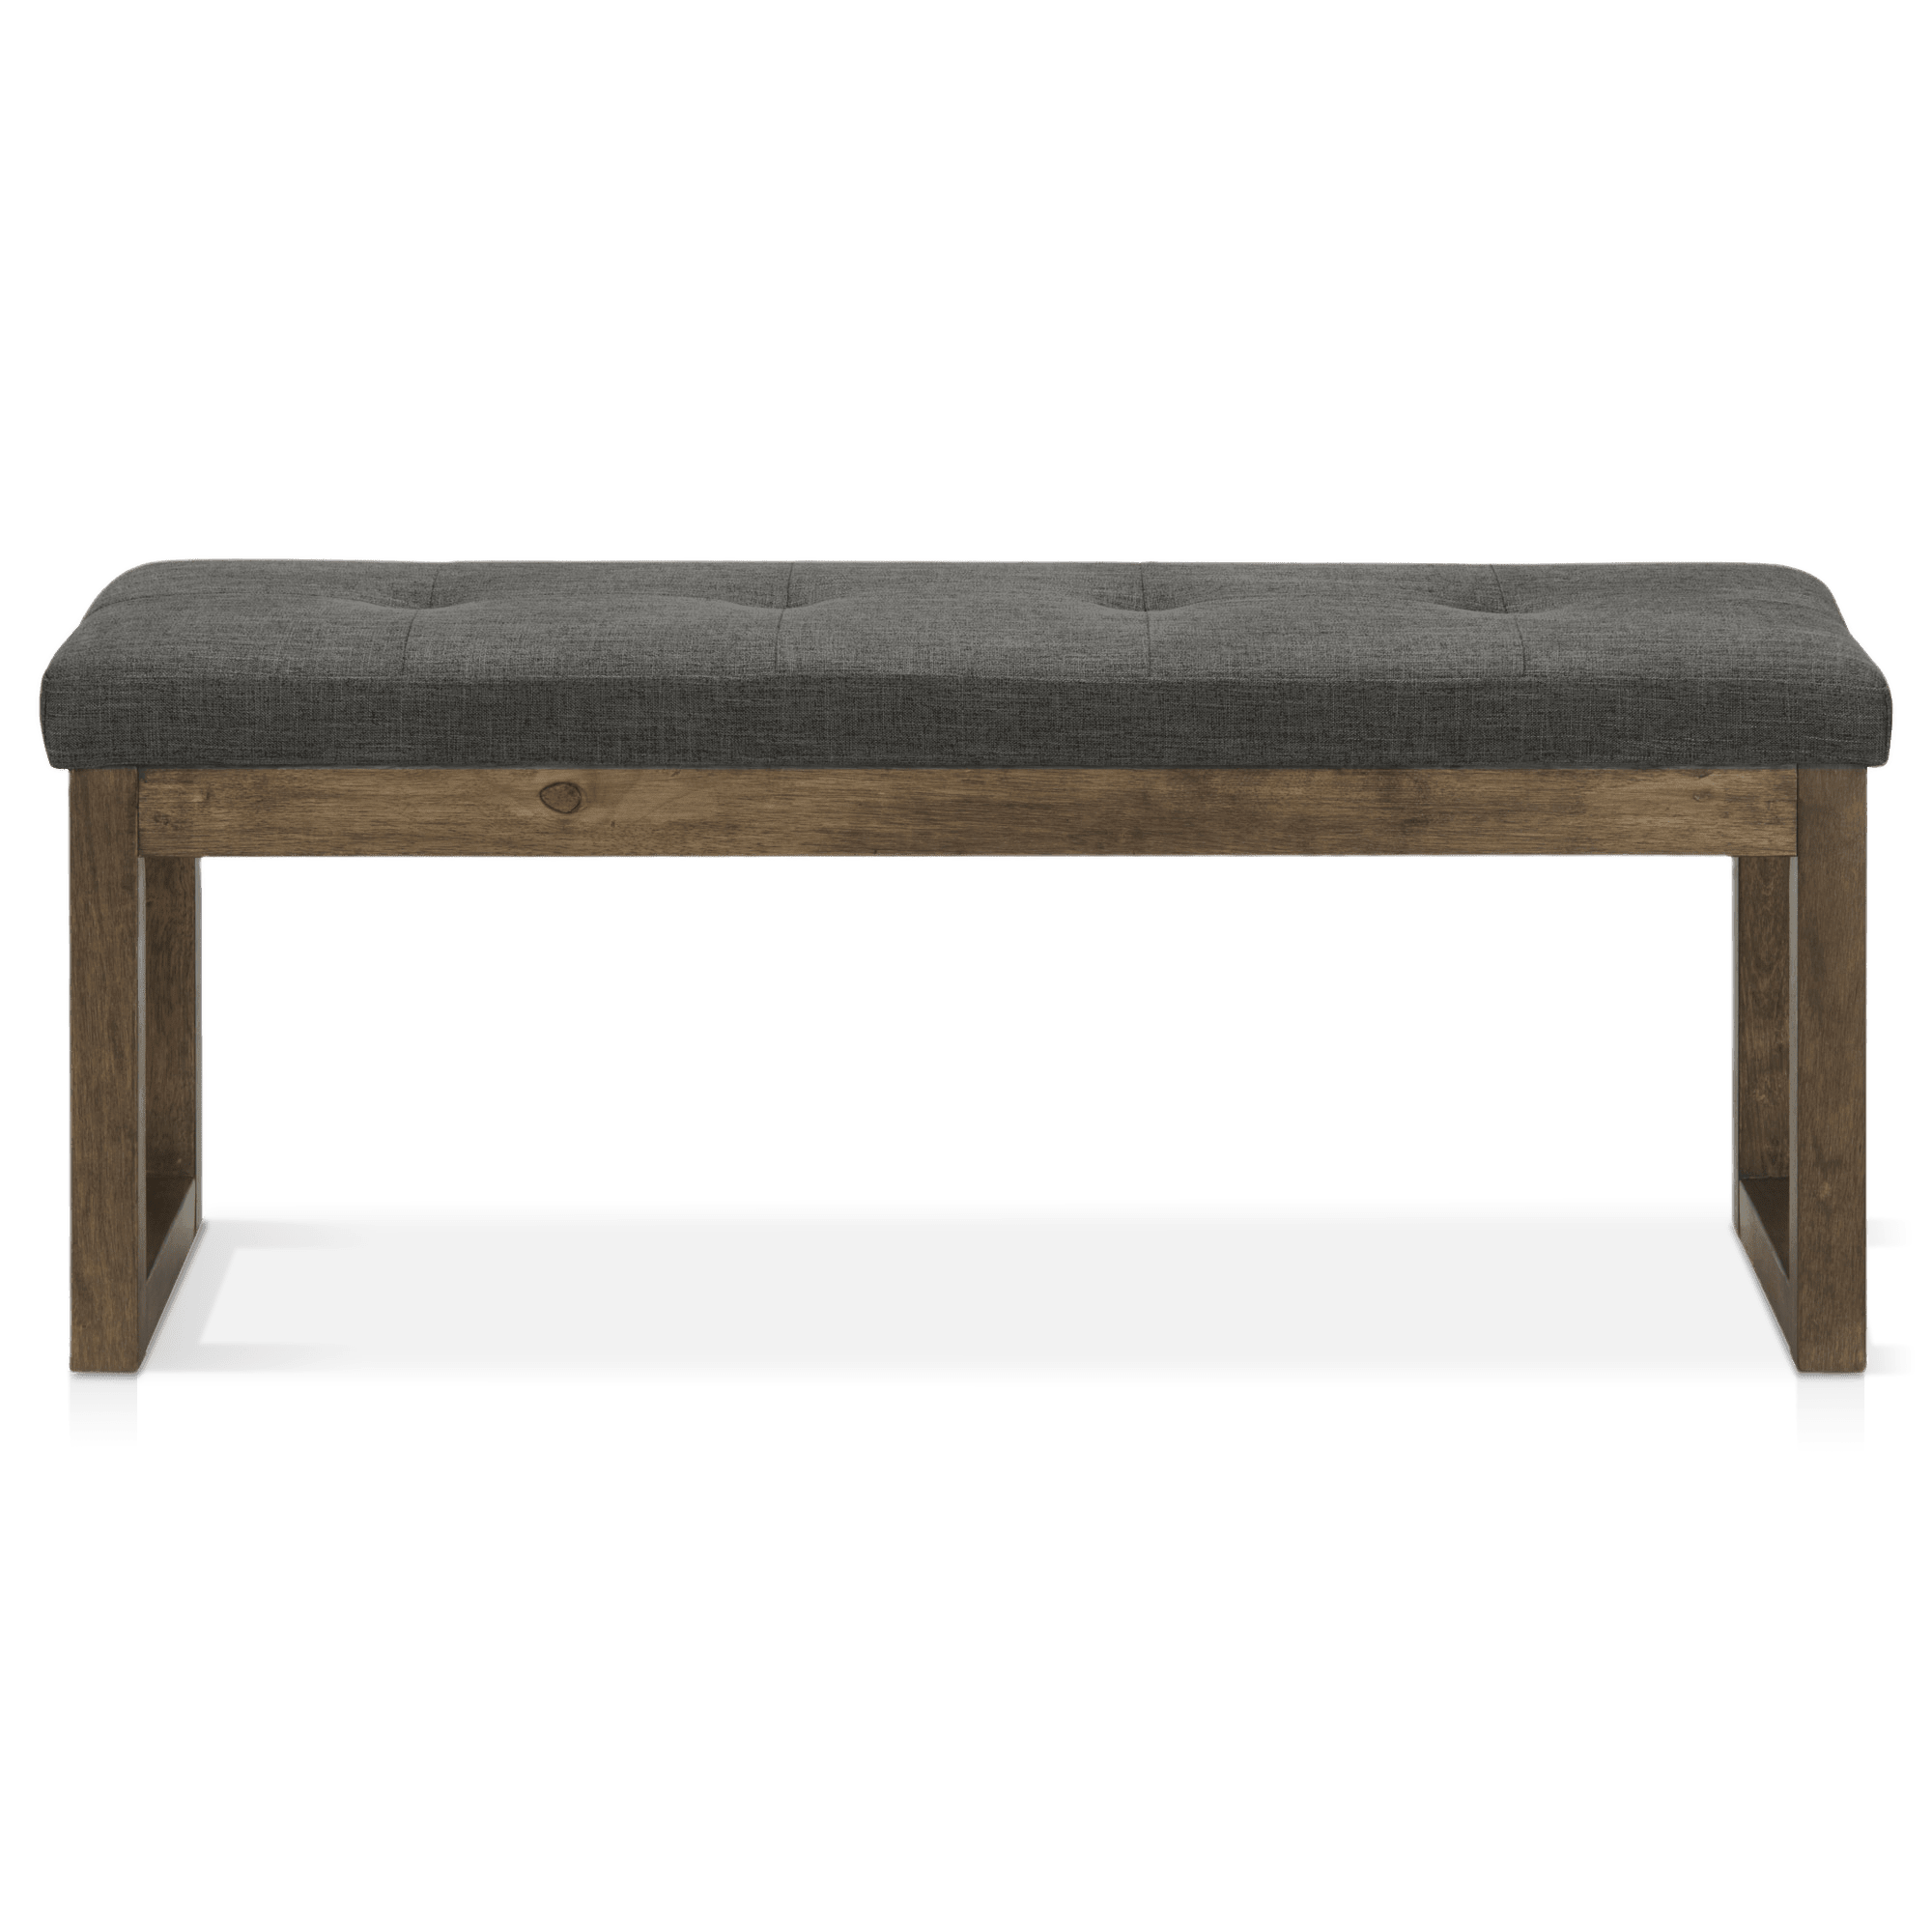 Upholstered Chita Fabric Bench with Wooden Legs